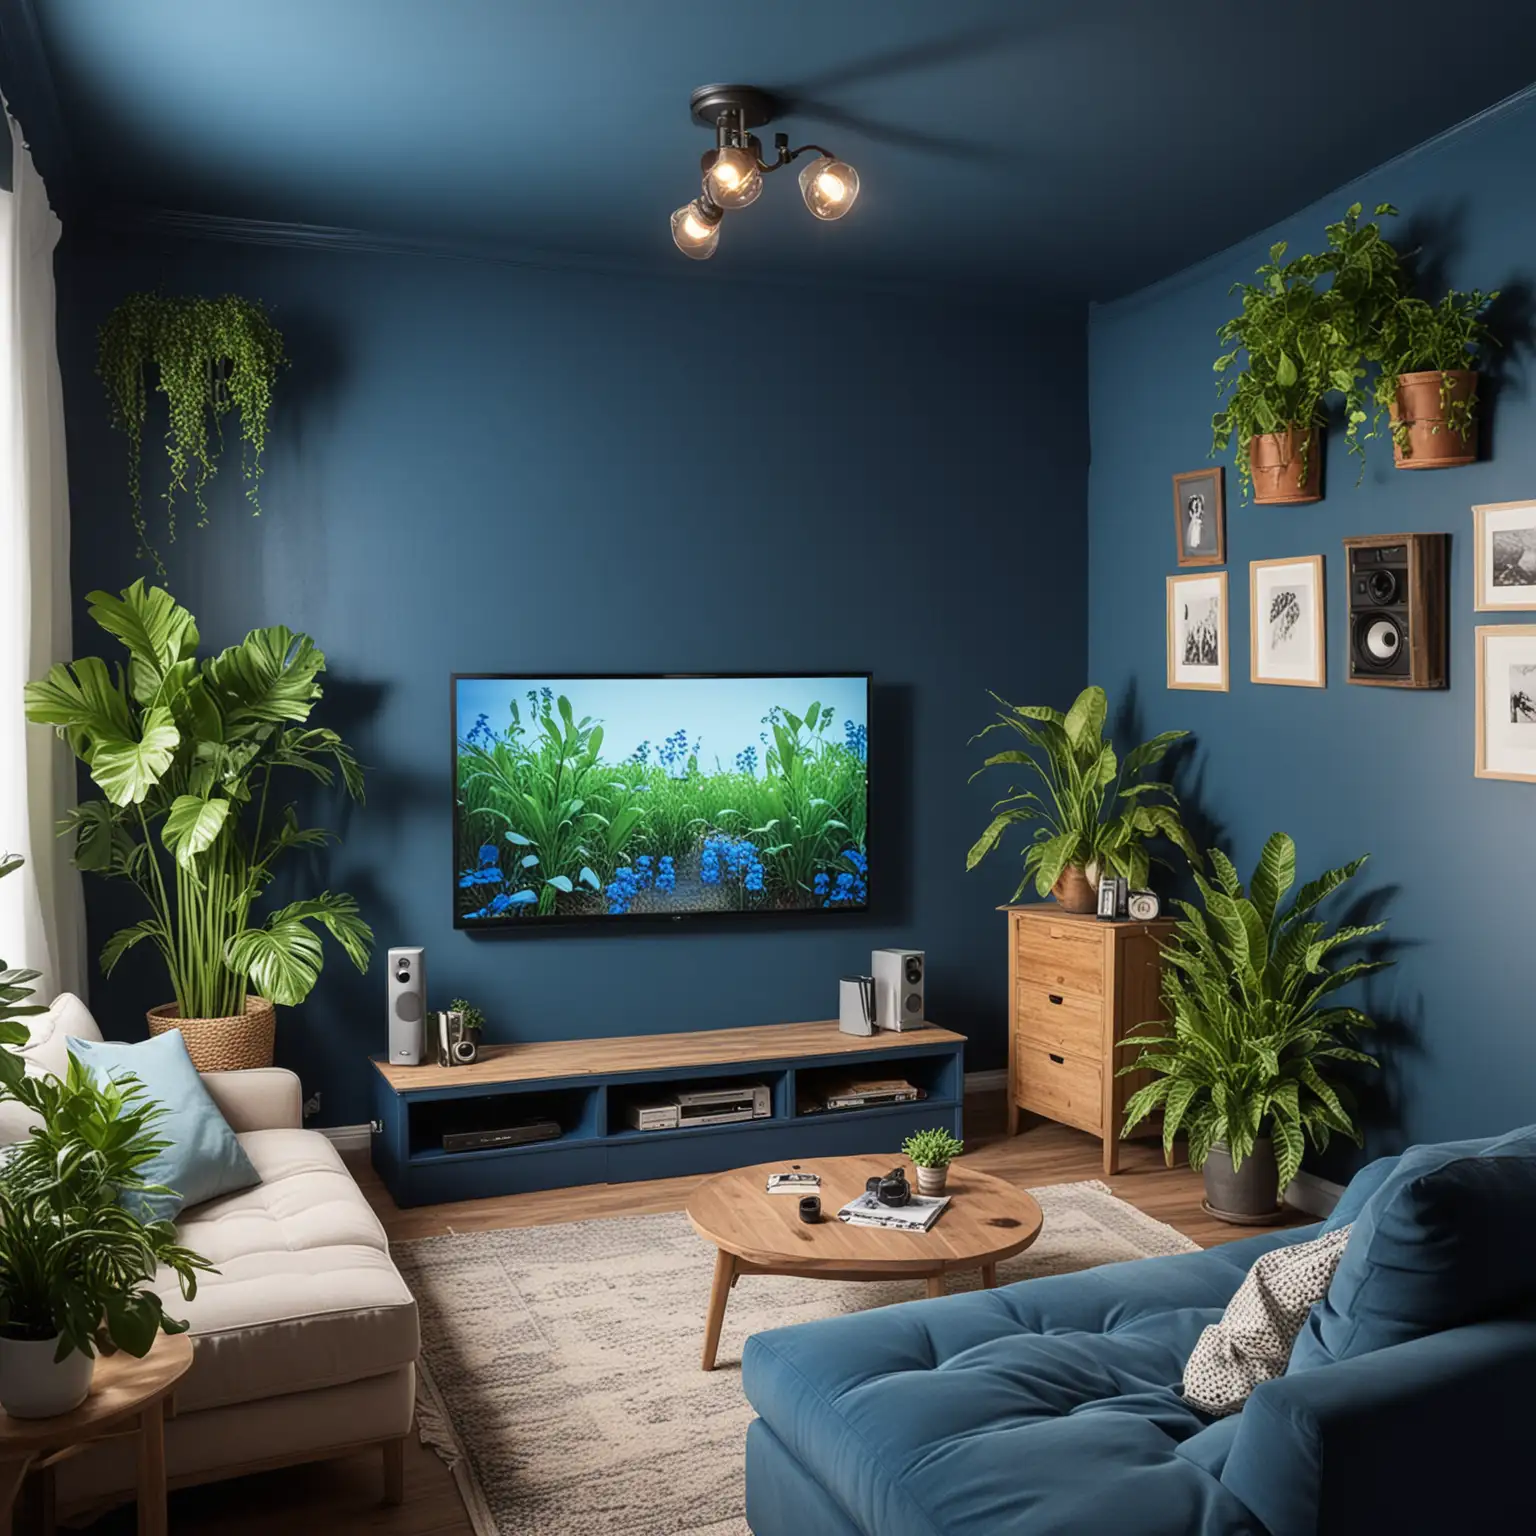 home theater in small room, neo rustic style, vibrant blue painted walls, projector screen in wall, artificial plants, framed pictures in wall, cozy, Ikea furniture.